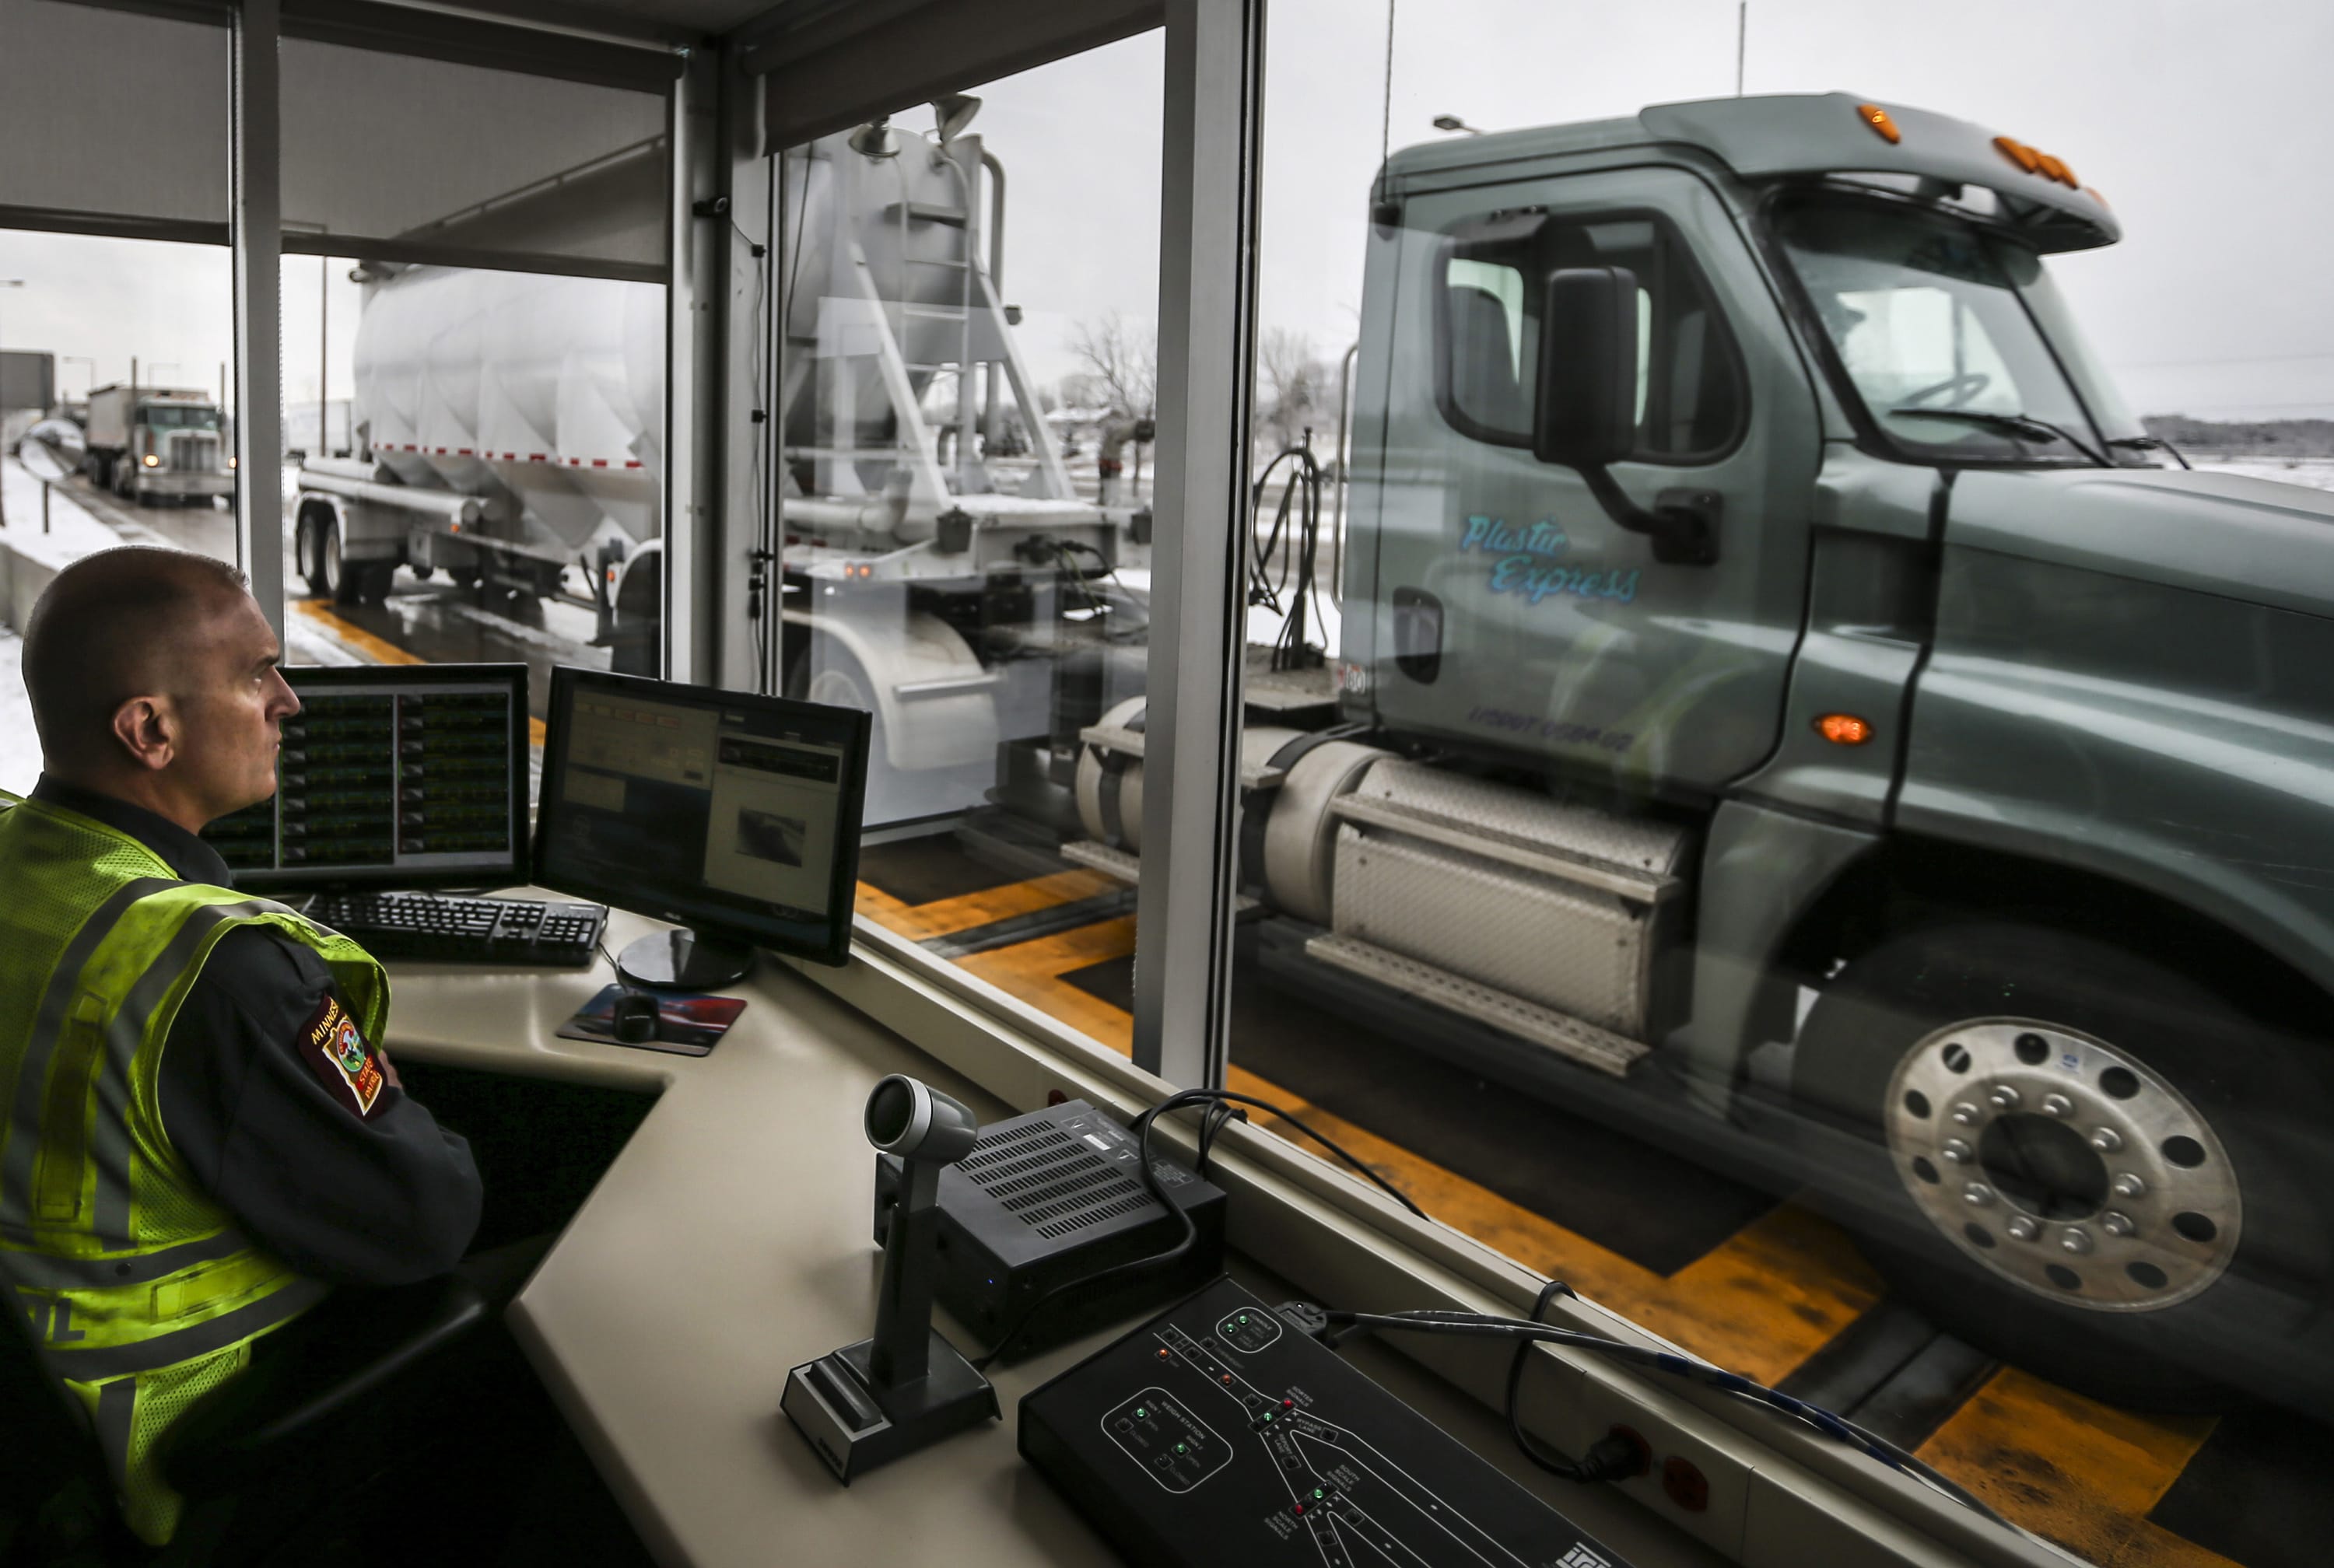 Commercial vehicle inspector Tony Kasella works at the desk monitoring trucks that drove through the St. Croix weigh station on March 23, 2015, in Minneapolis, Minn.